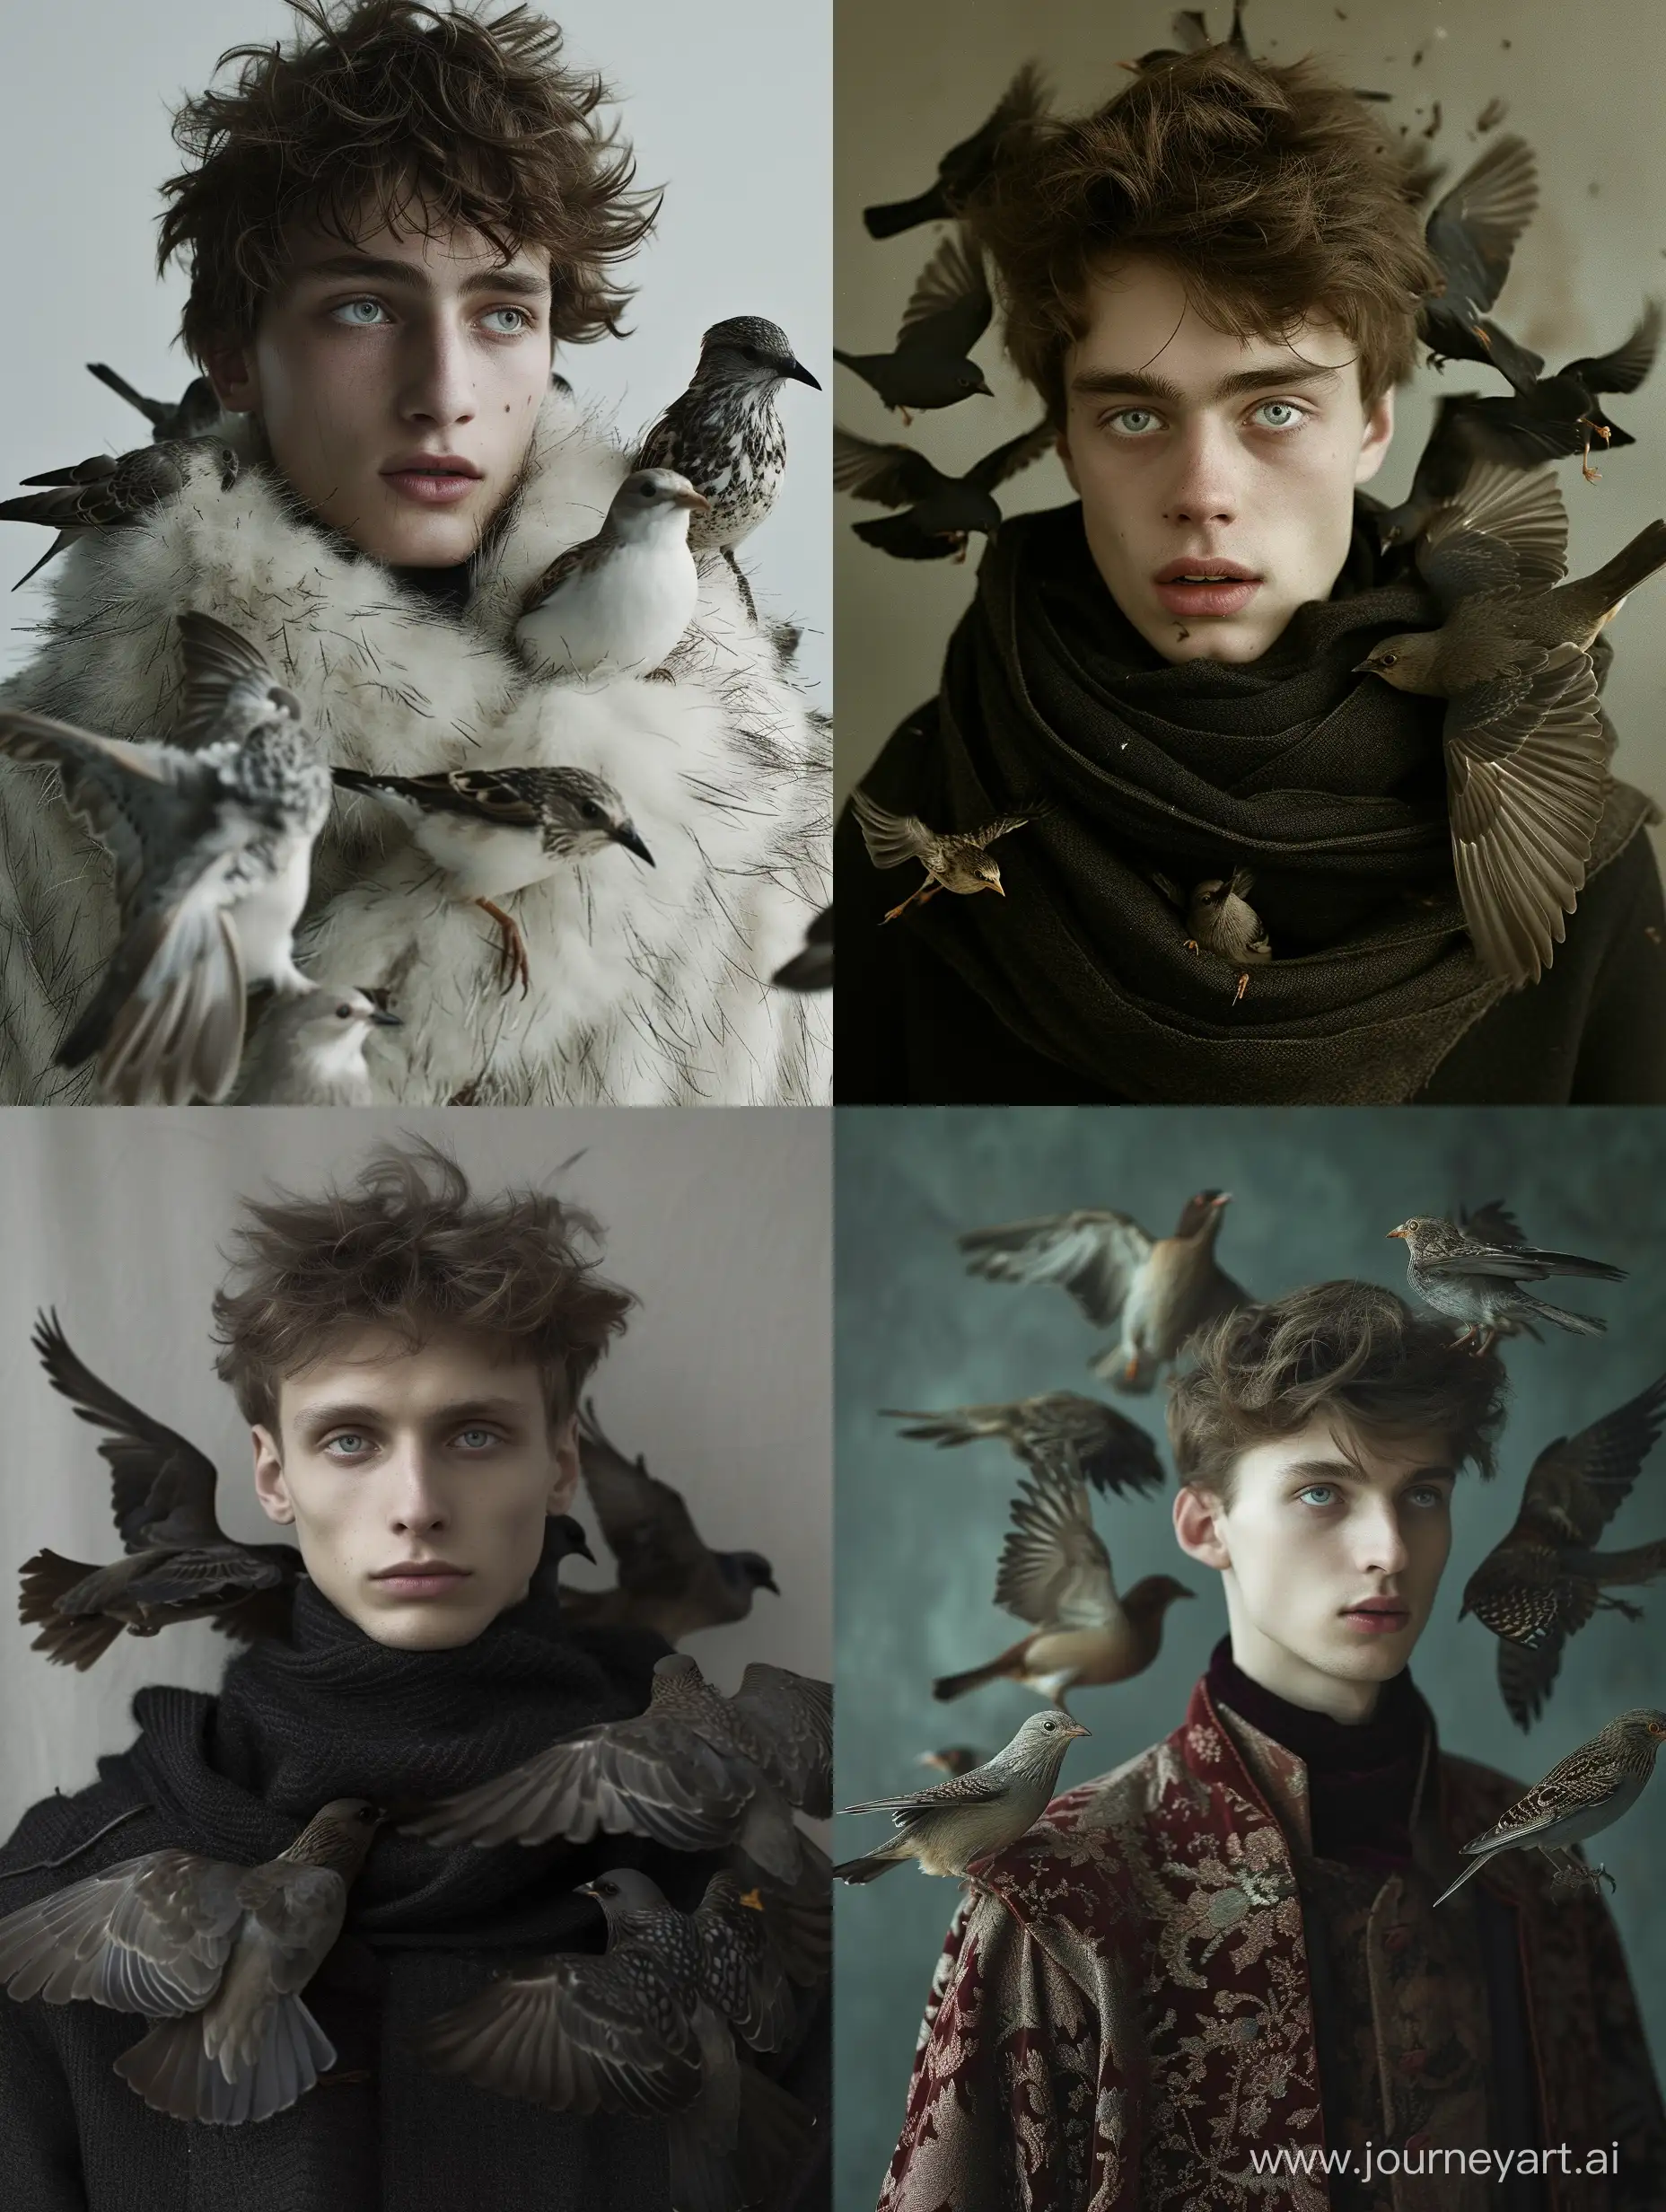 Fashionable-Slavic-Youth-Surrounded-by-Birds-in-Hyperrealistic-Portrait